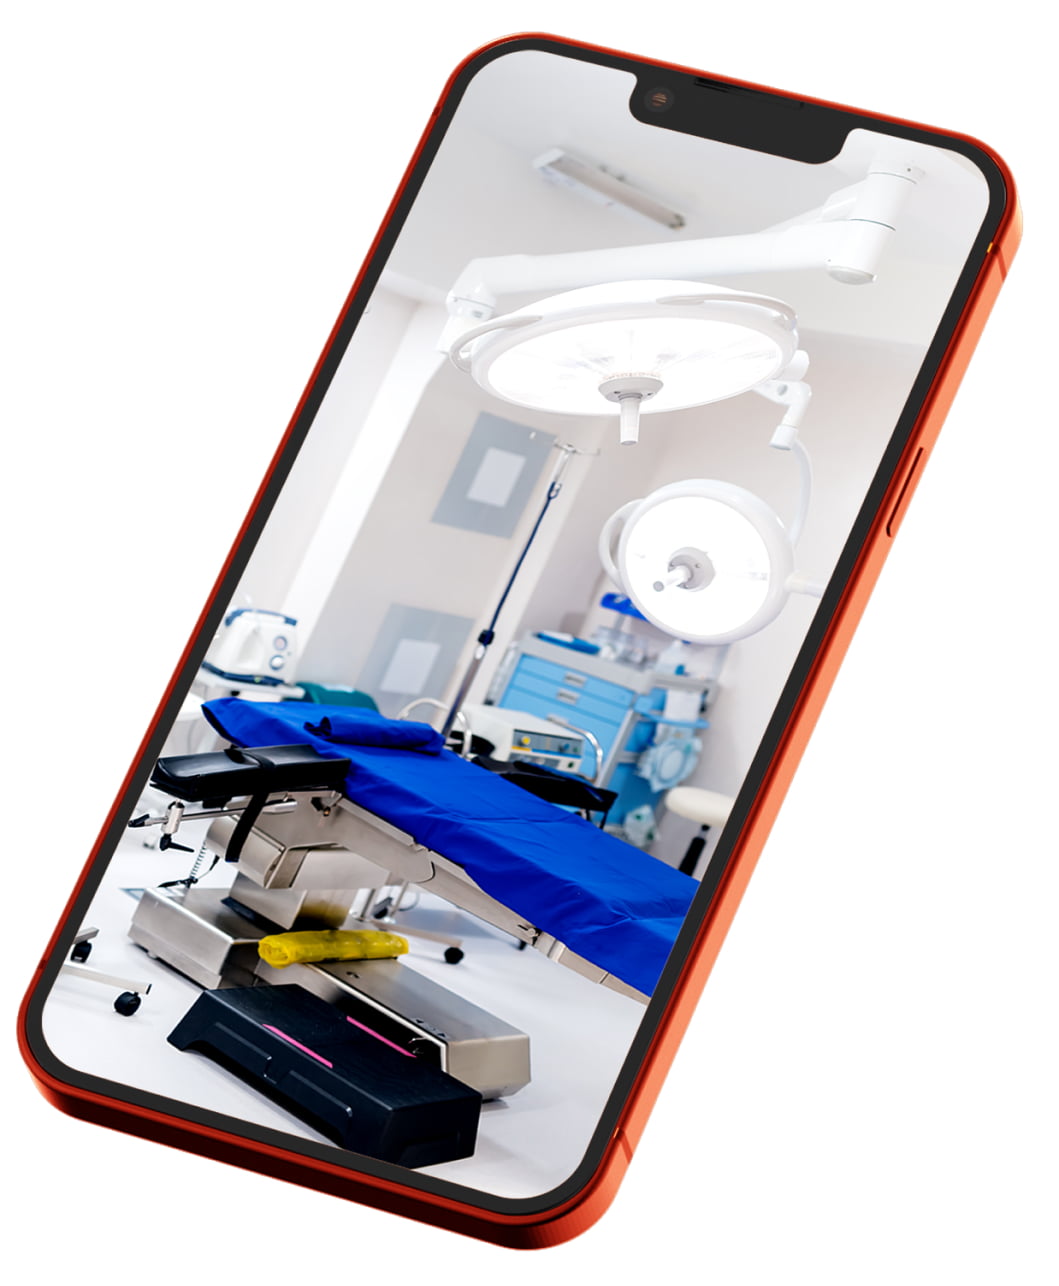 iphone showcasing medical device in surgery room